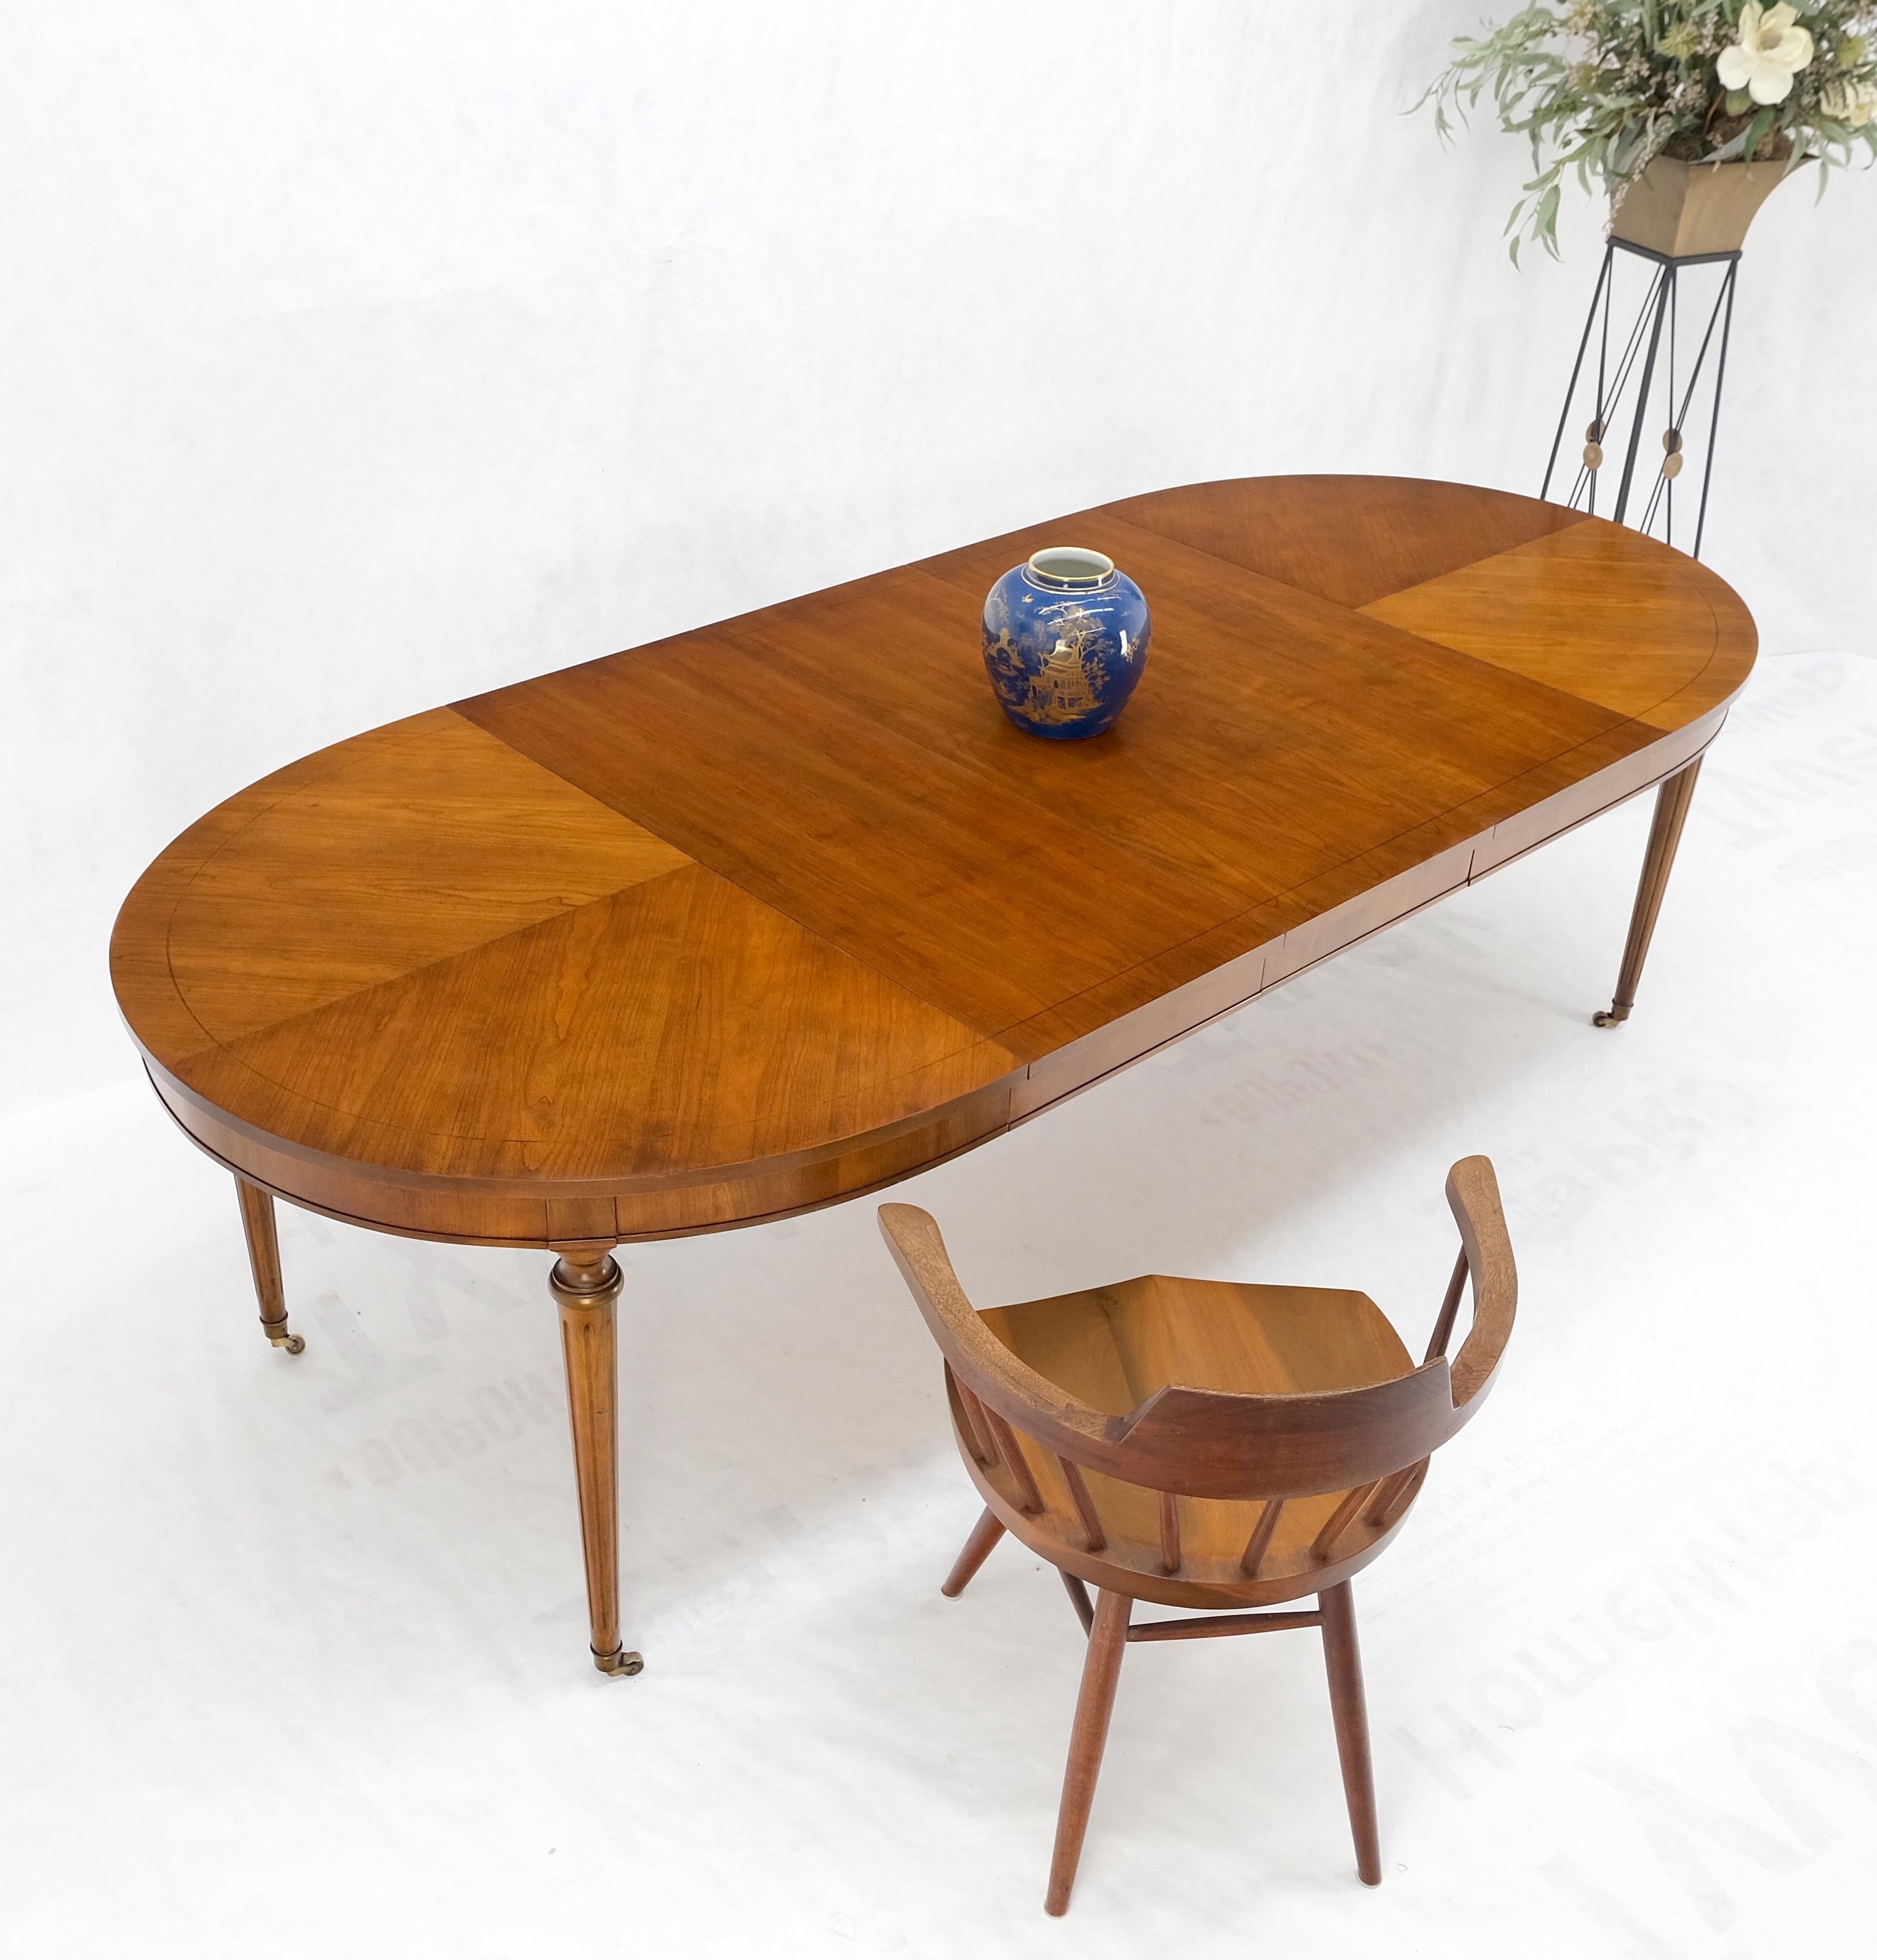 American Mid-Century Oval Satinwood DiningTable 3 Leaves Fluted Tapered Leg Mint For Sale 4